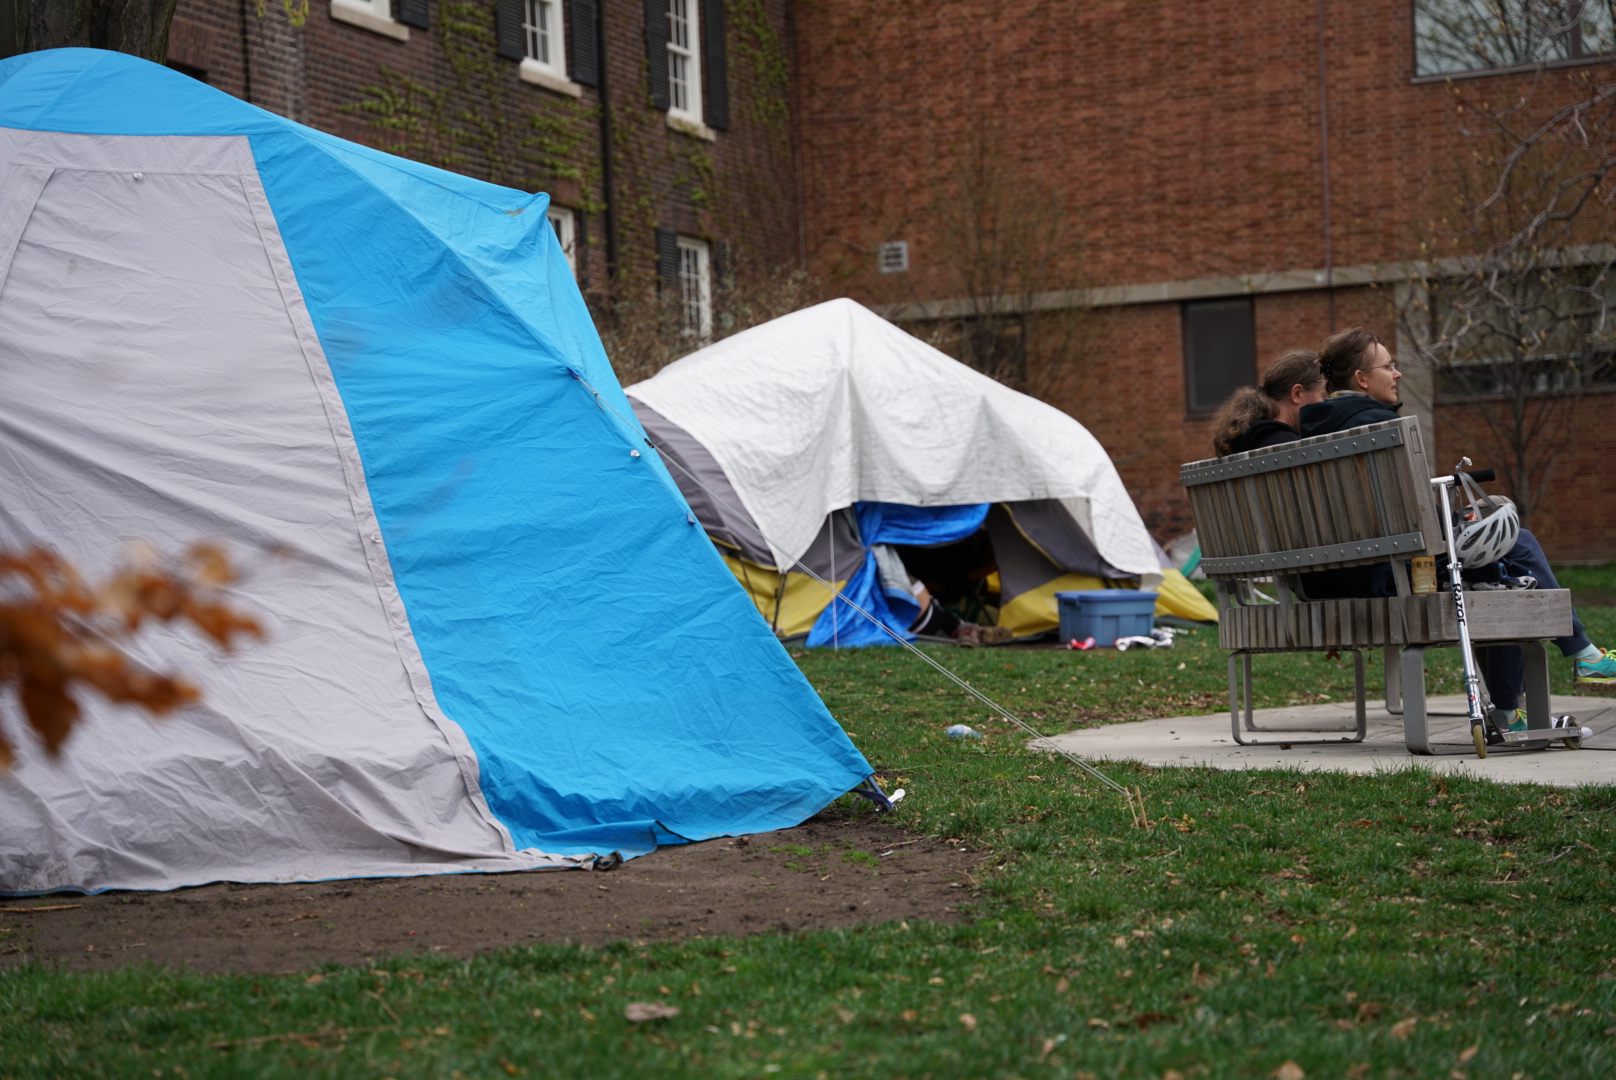 Those experiencing homelessness in Toronto have continued sleeping in public spaces like Grange Park during the pandemic. 